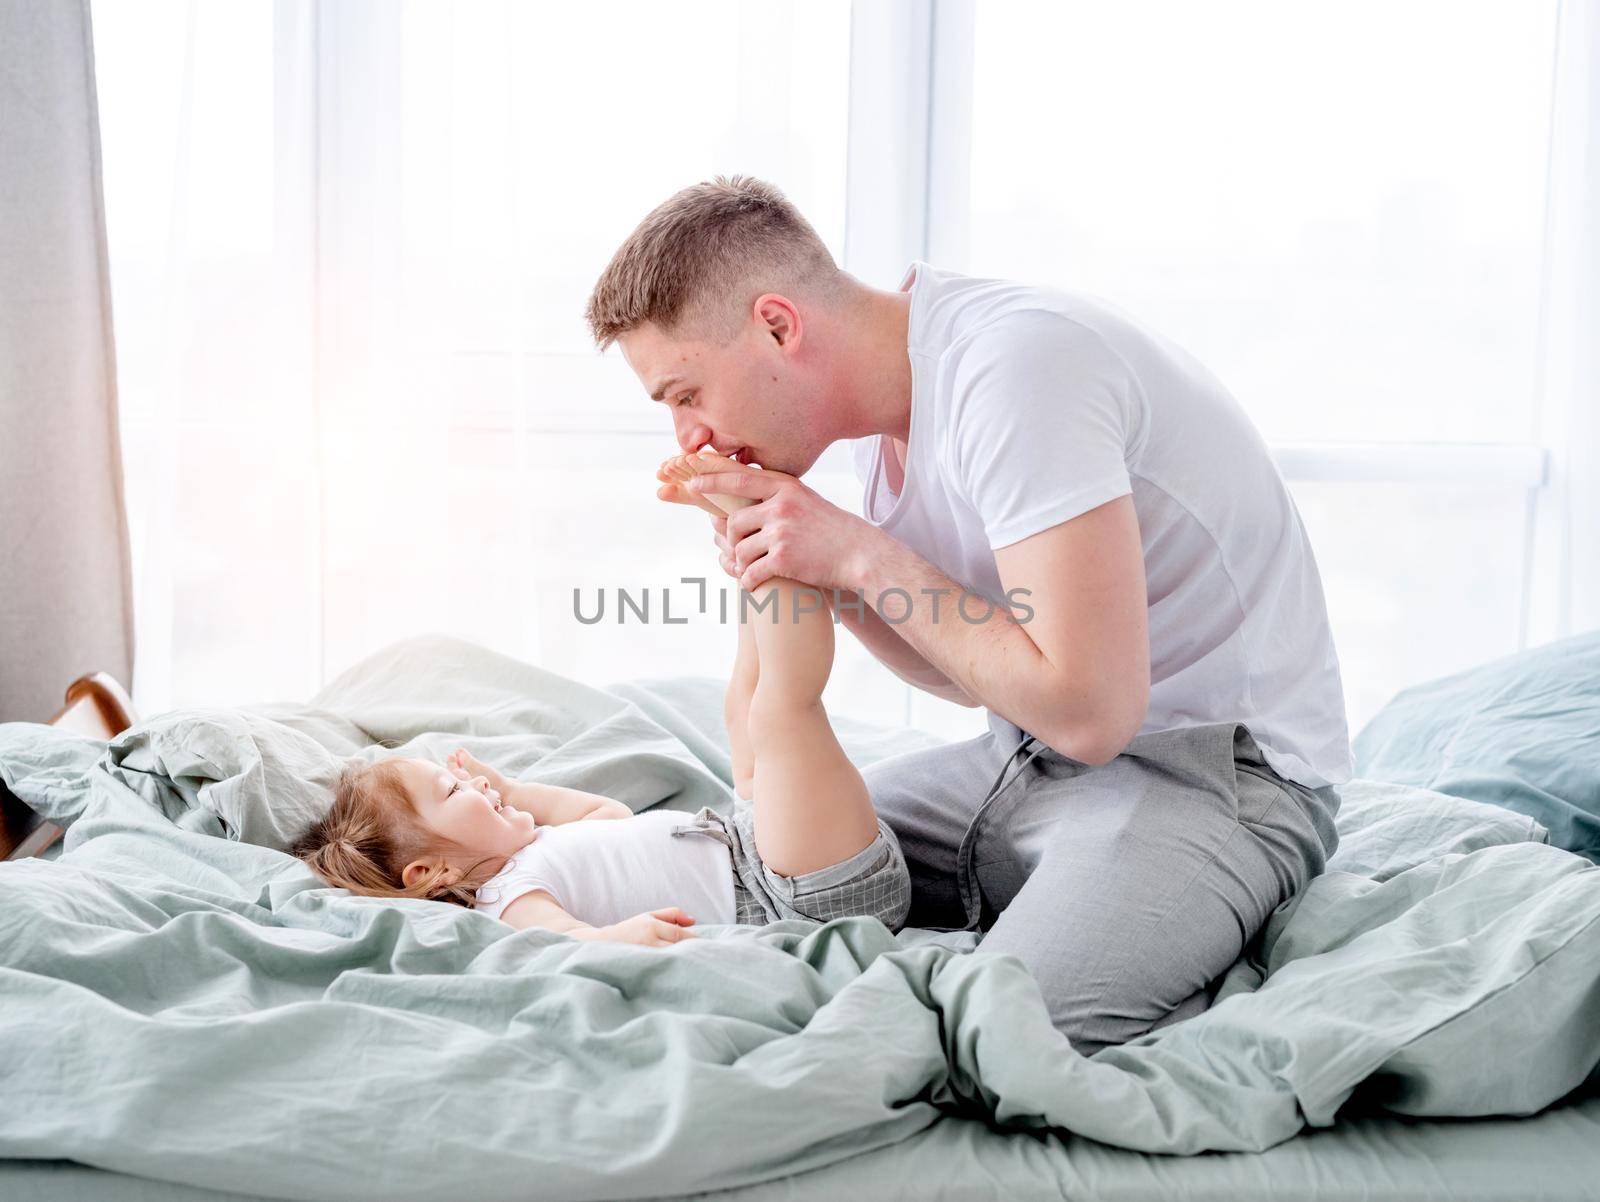 Young father kisses feet of her little daughter lying in the bed. Smiling child with her parent in the morning time. Beautiful moments of dad with his kid in the bedroom together